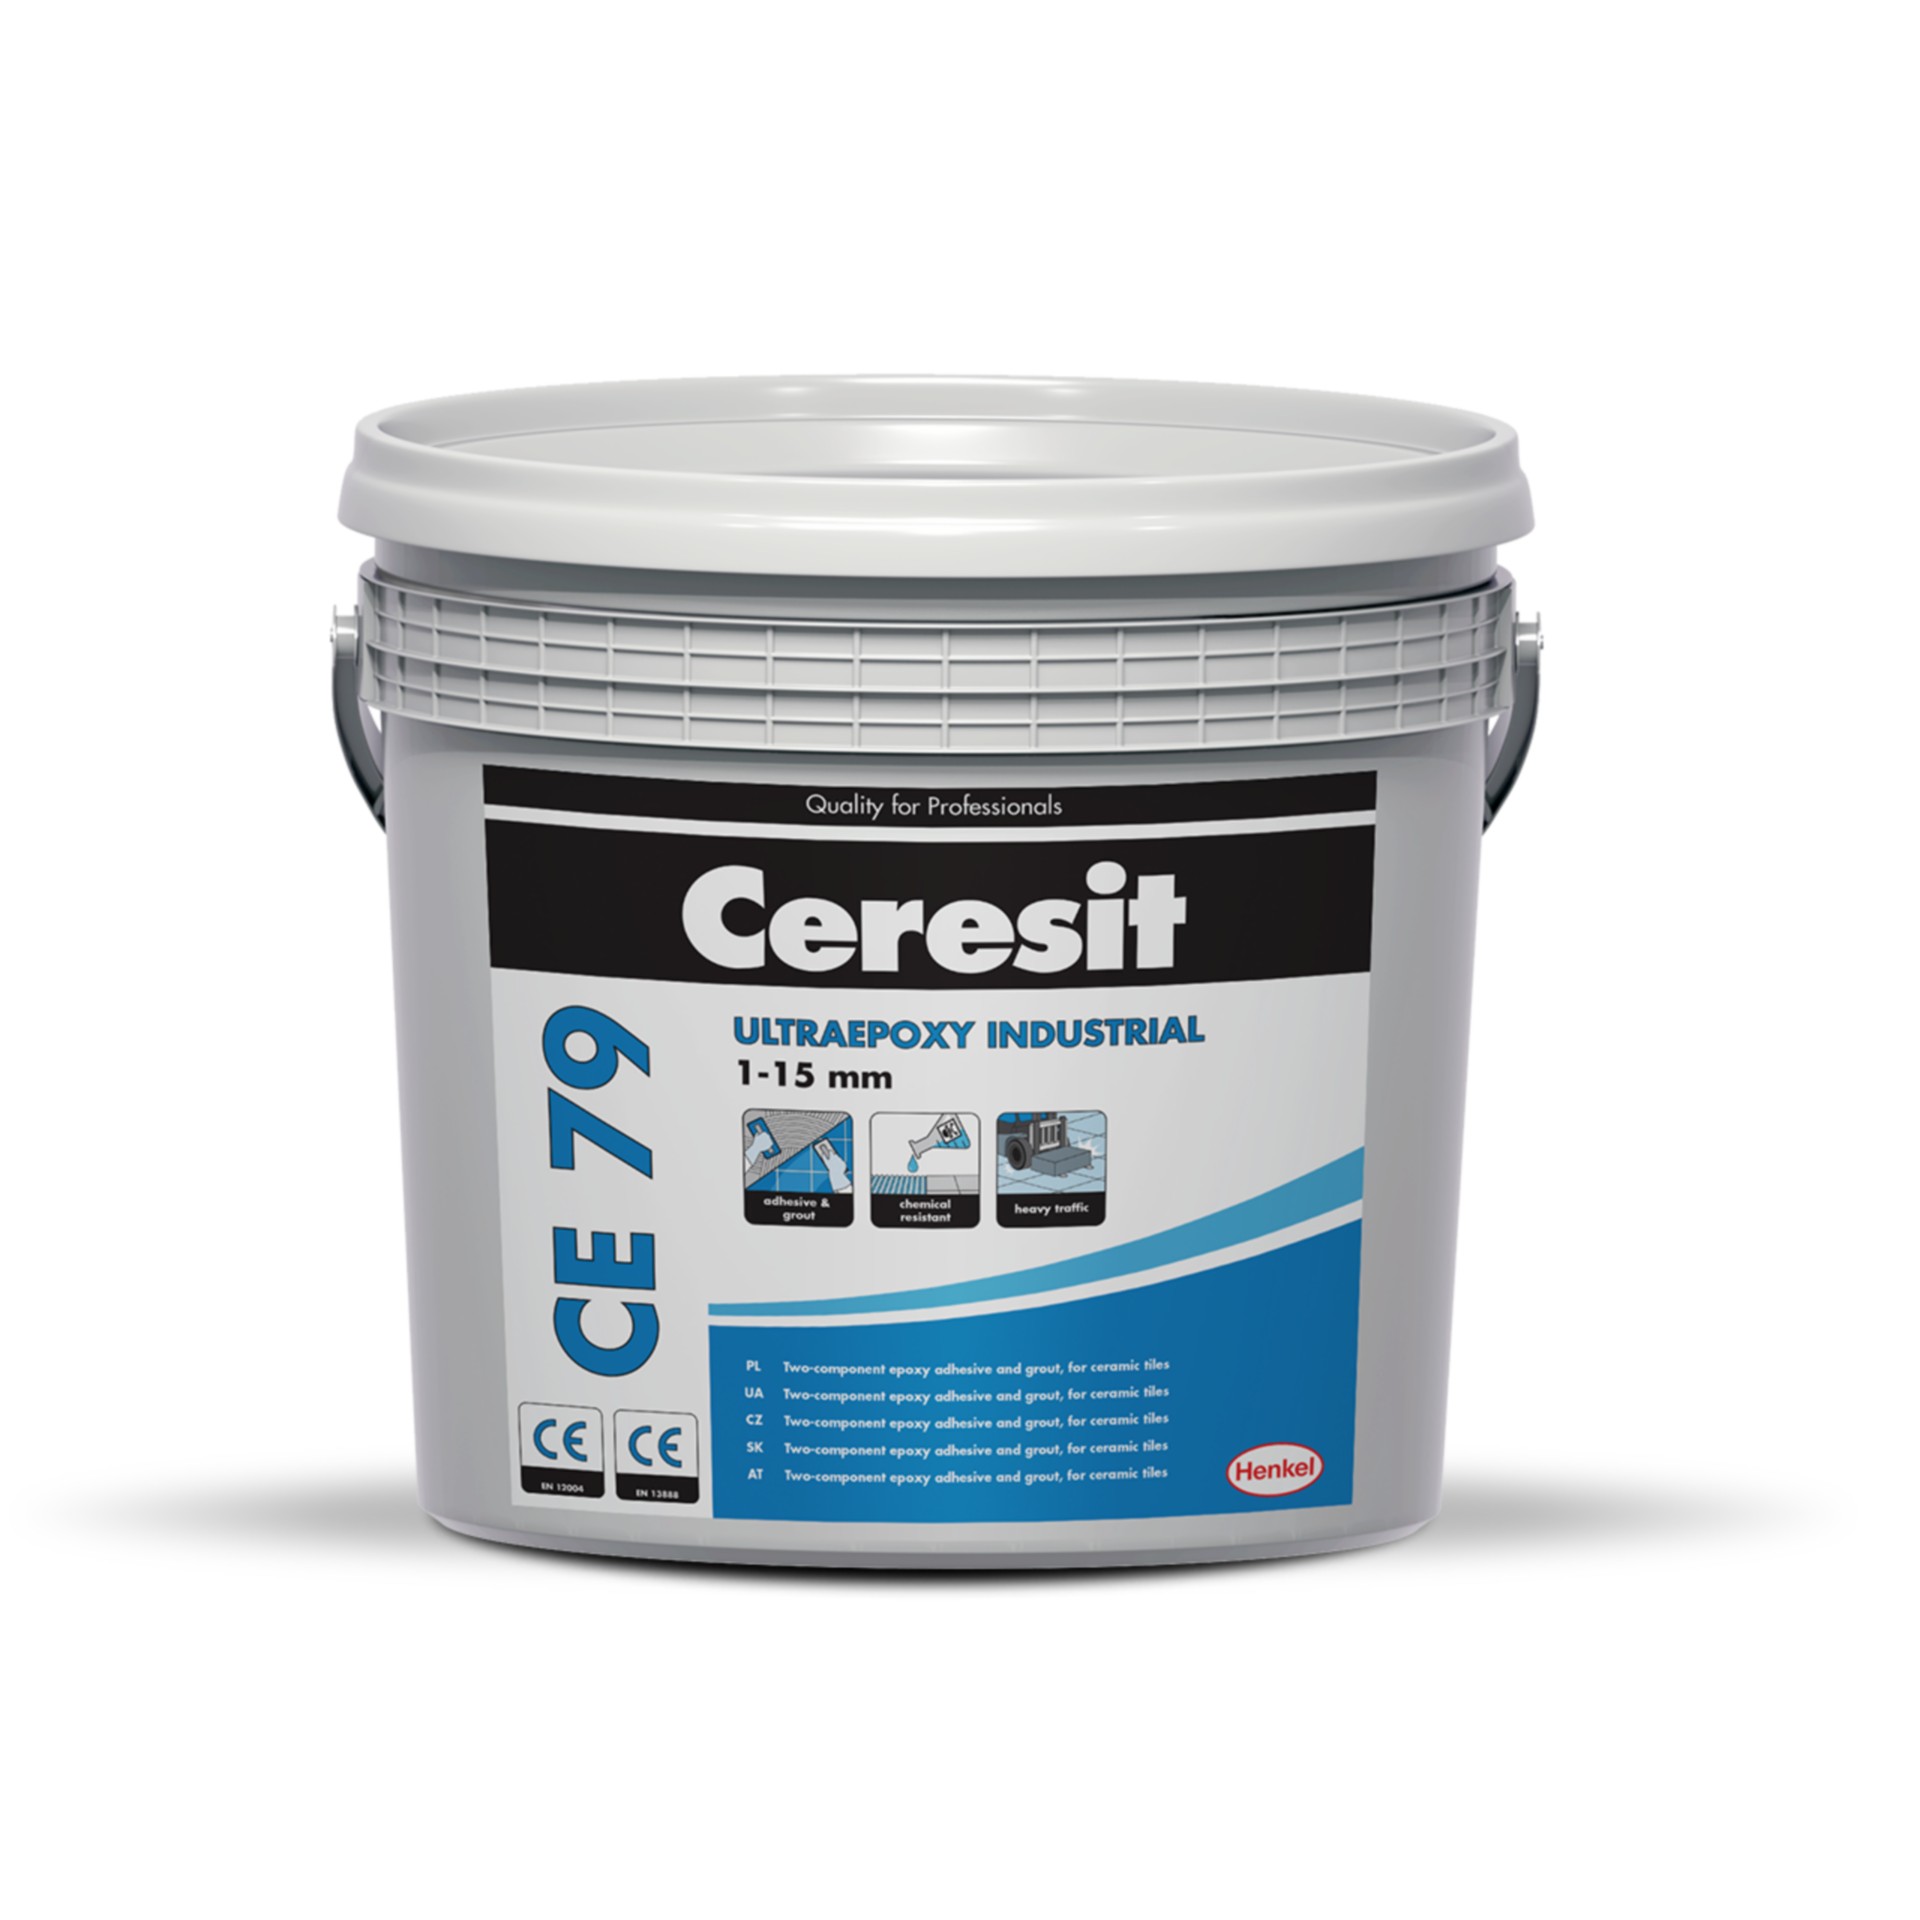 Ceresit CE79 Ultraepoxy Industrial. Two-component chemical-resistant epoxy mortar. Bahama (743) 5Kg